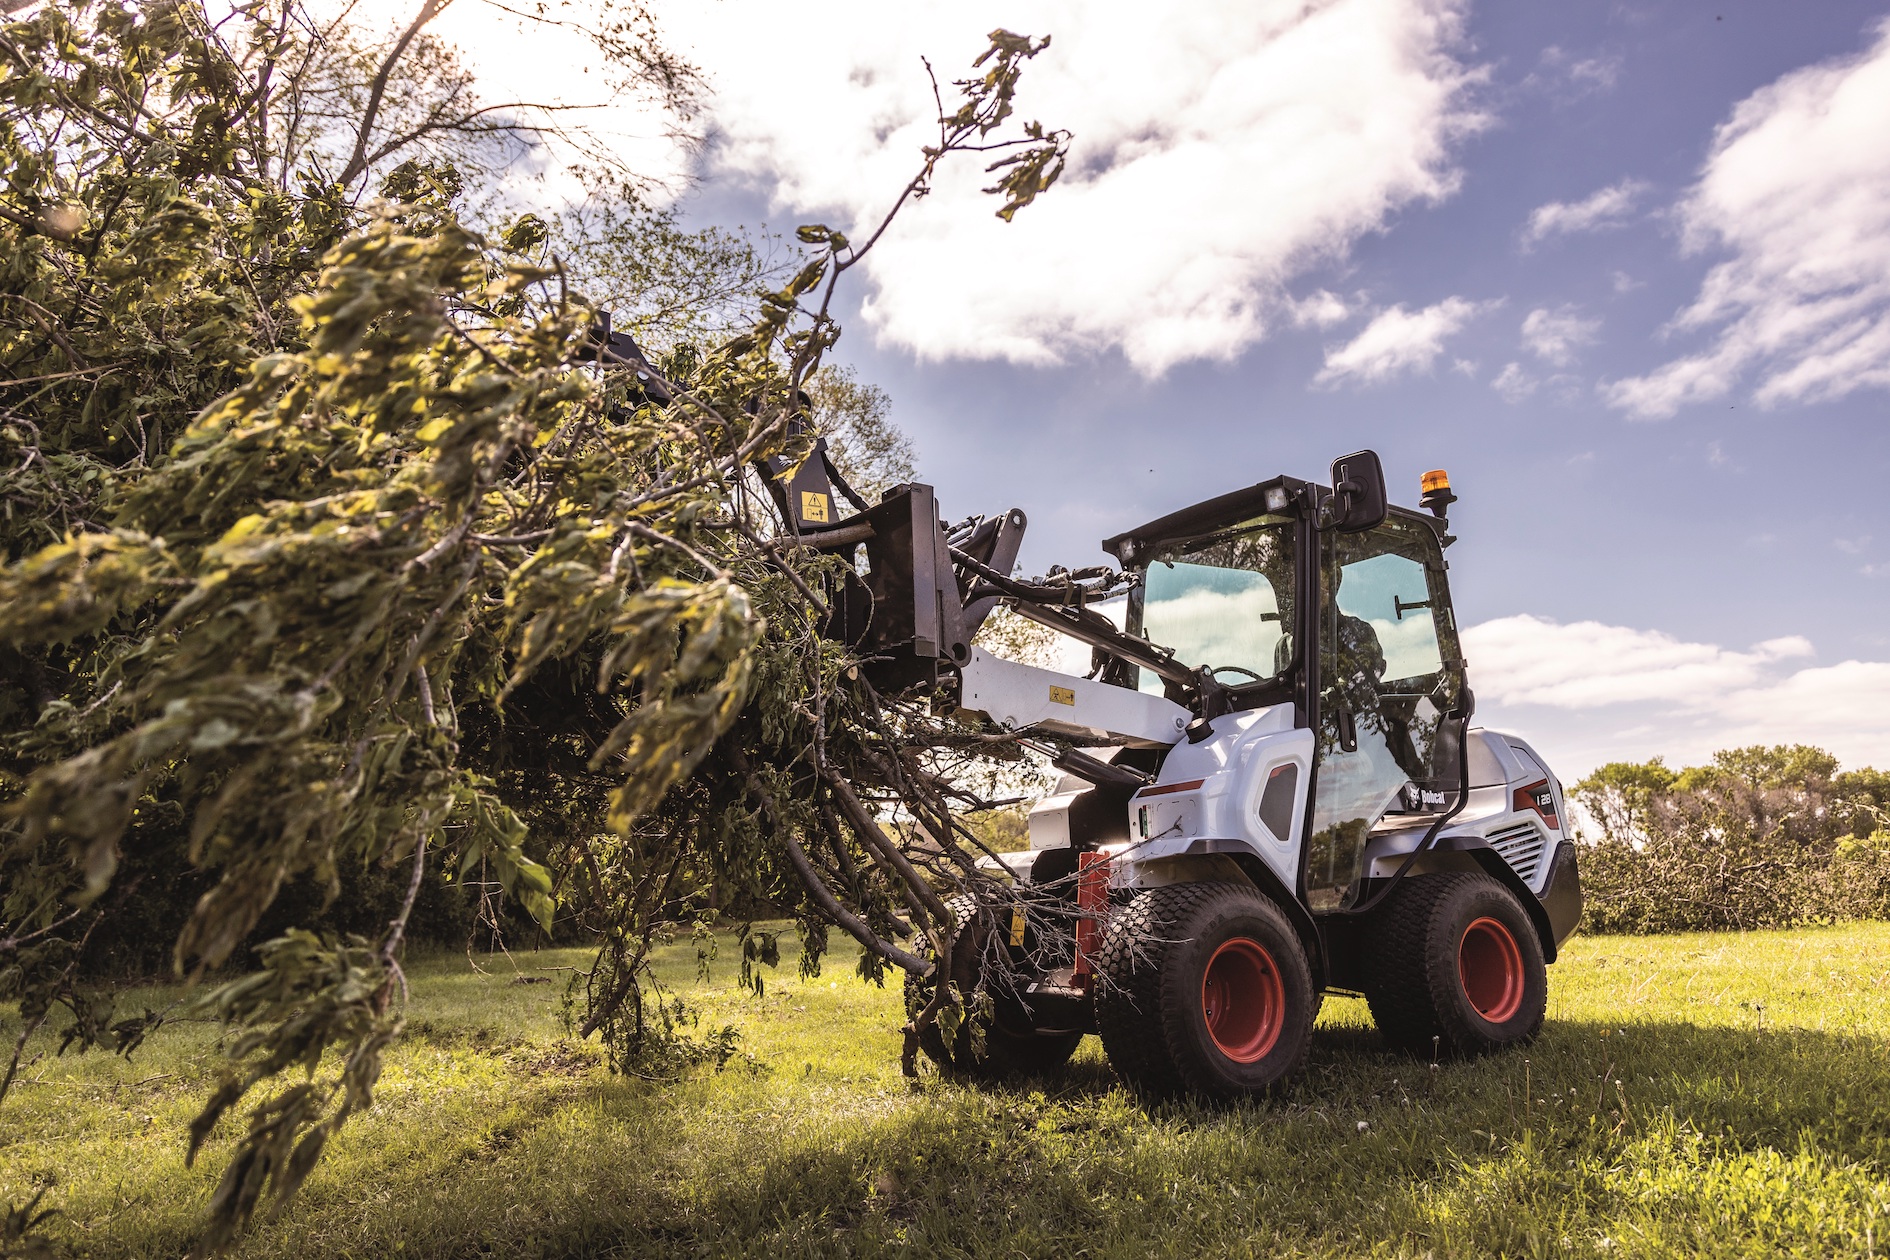 New BrushcatTM and Log Grapple Attachments from Bobcat